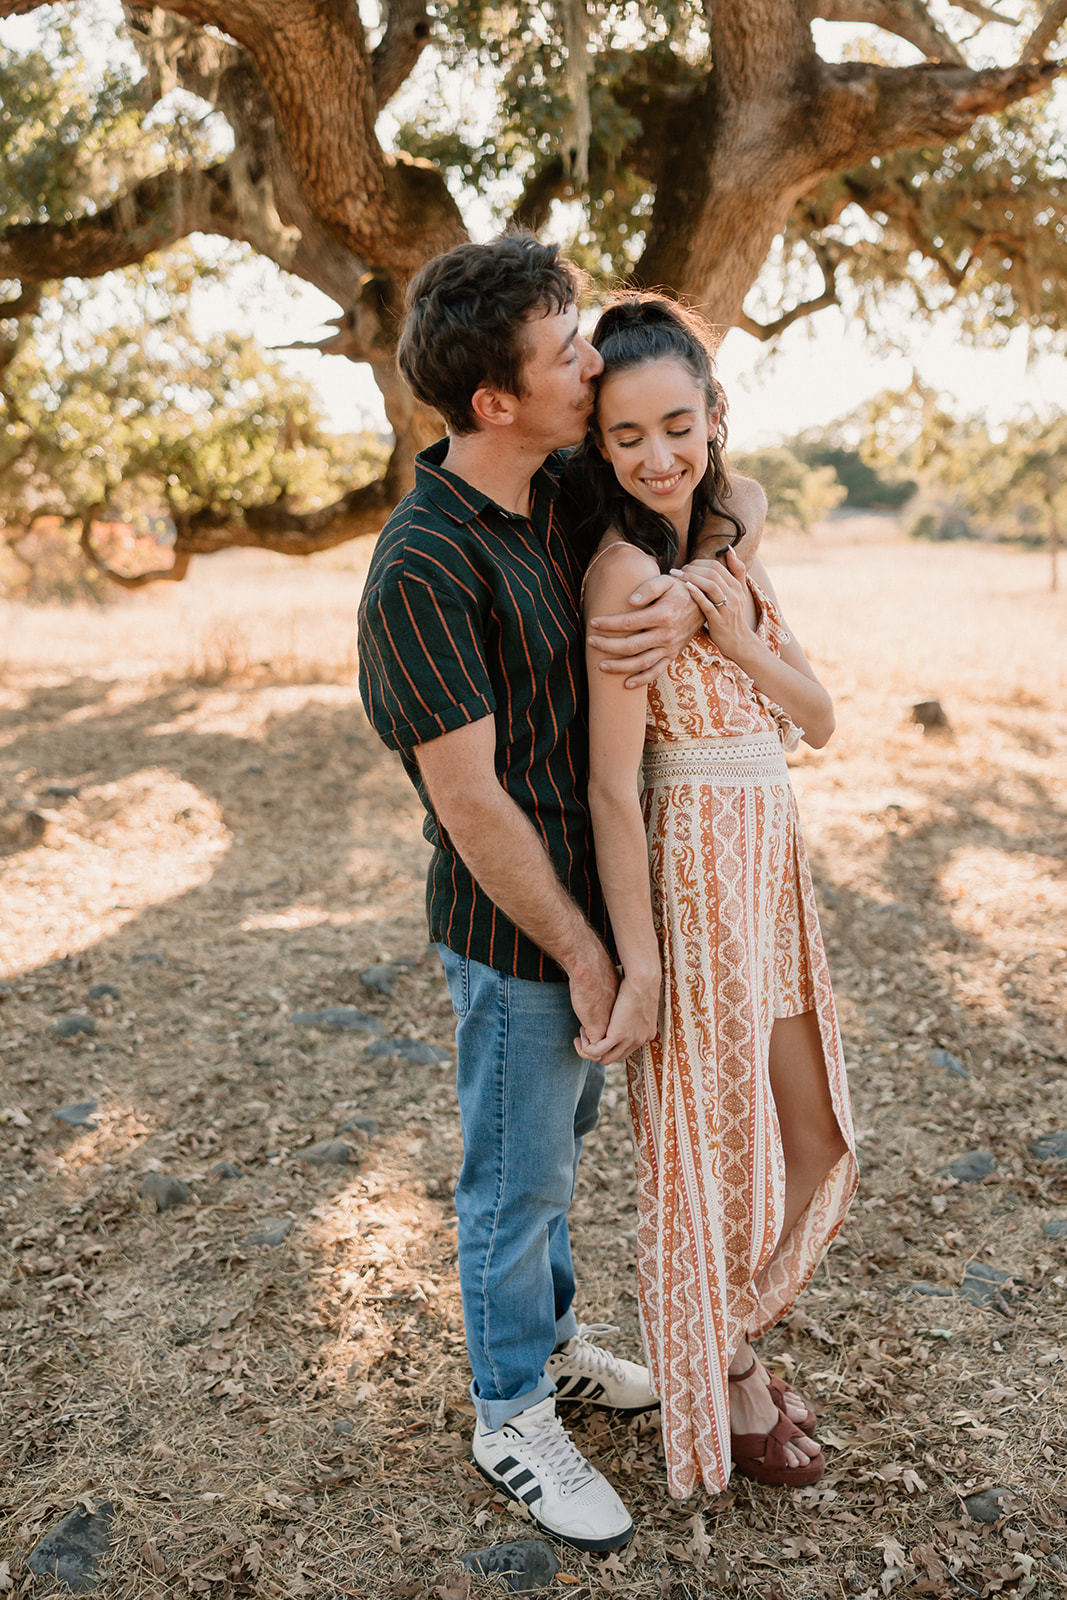 A couple embracing under a tree, exchanging a loving gaze, dressed in casual summer attire for their park engagement photos.